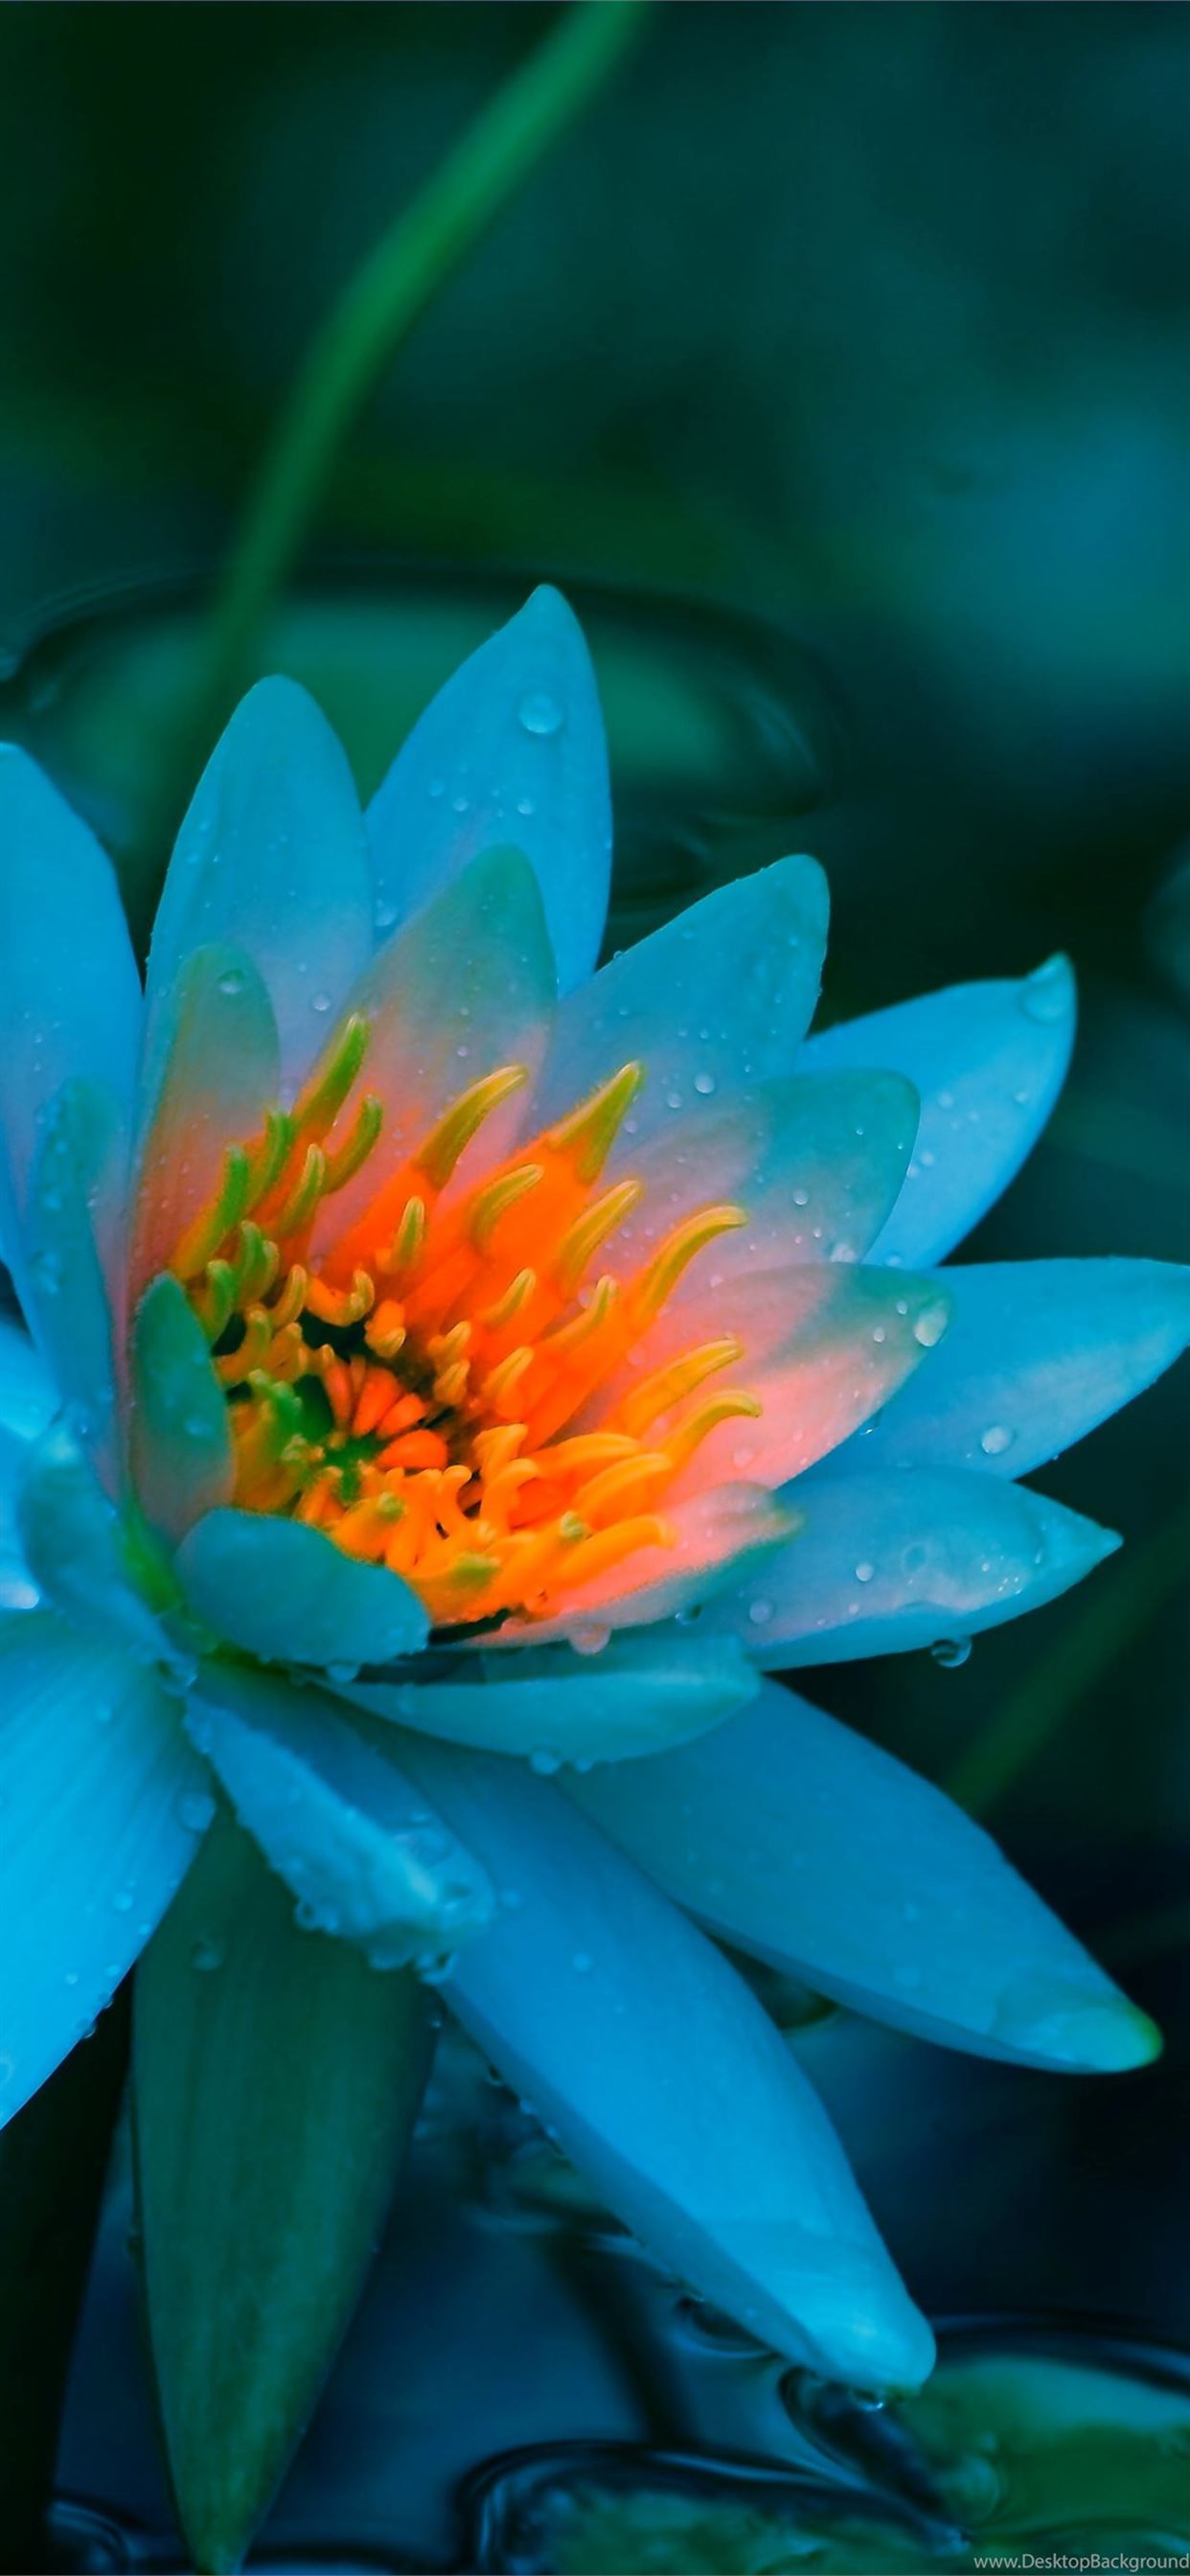 Blue Lotus Flower 14 Lotus Flower Pictures Images ... iPhone Wallpapers  Free Download